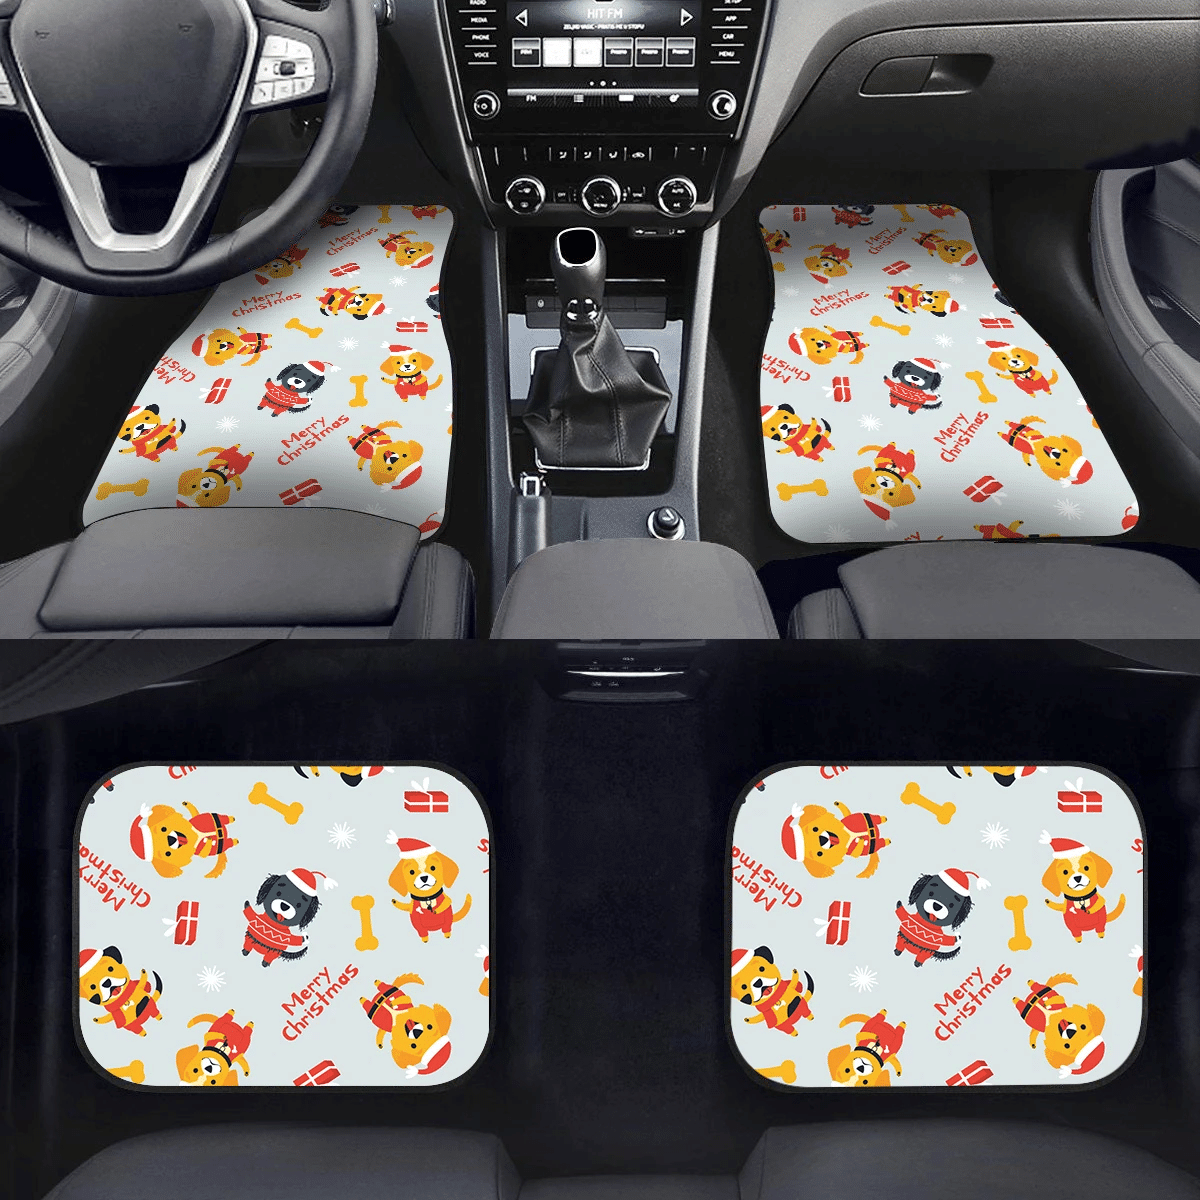 Cute Dogs Of Different Breeds In Christmas Costumes Car Mats Car Floor Mats